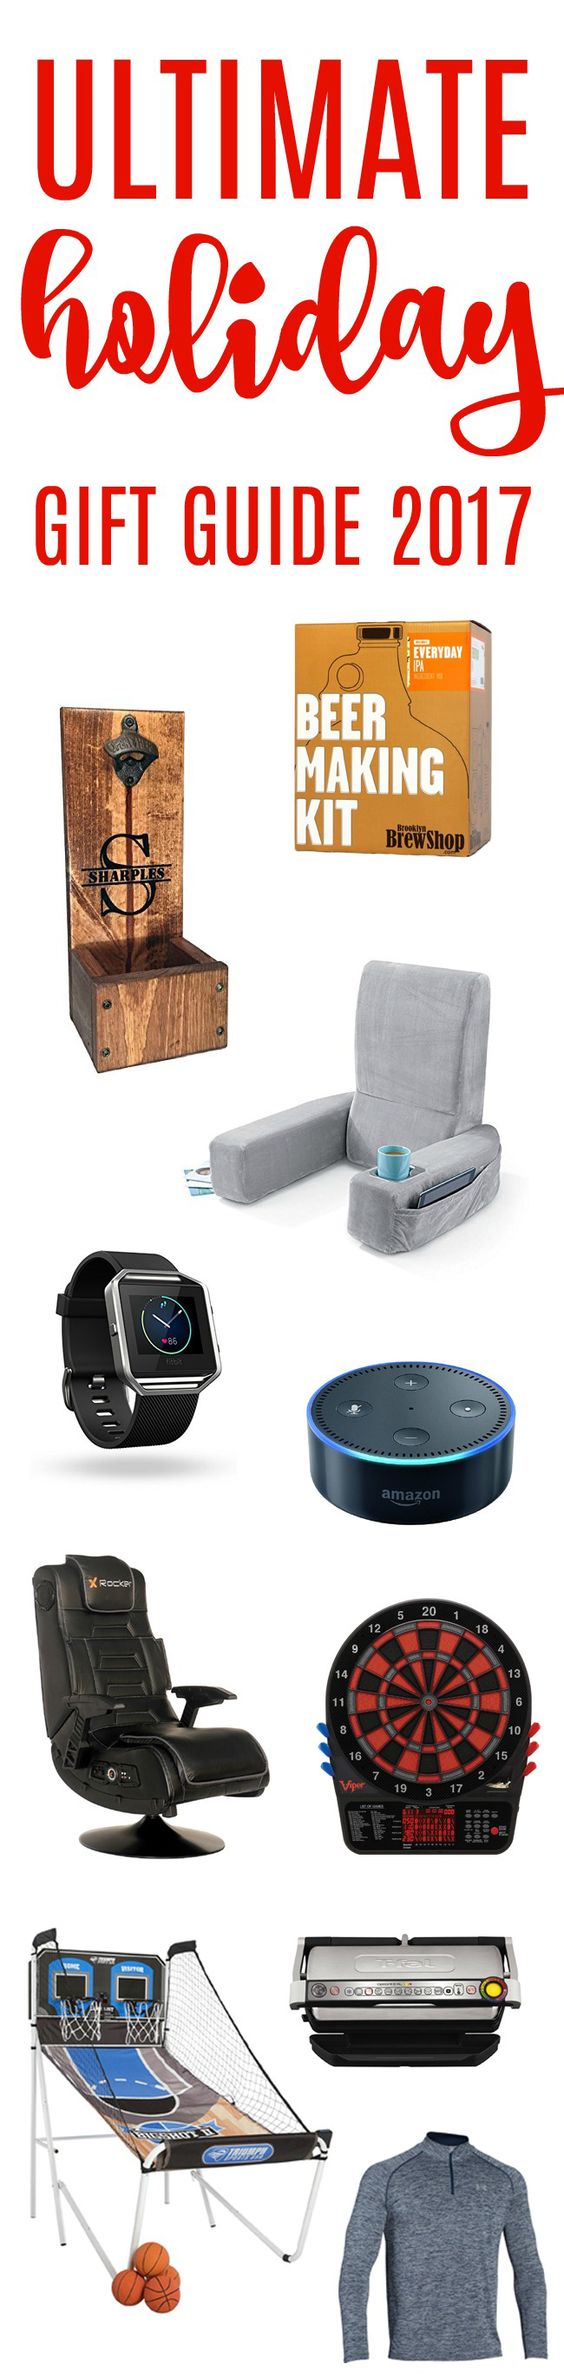 Ultimate Holiday Gift Guide For Men